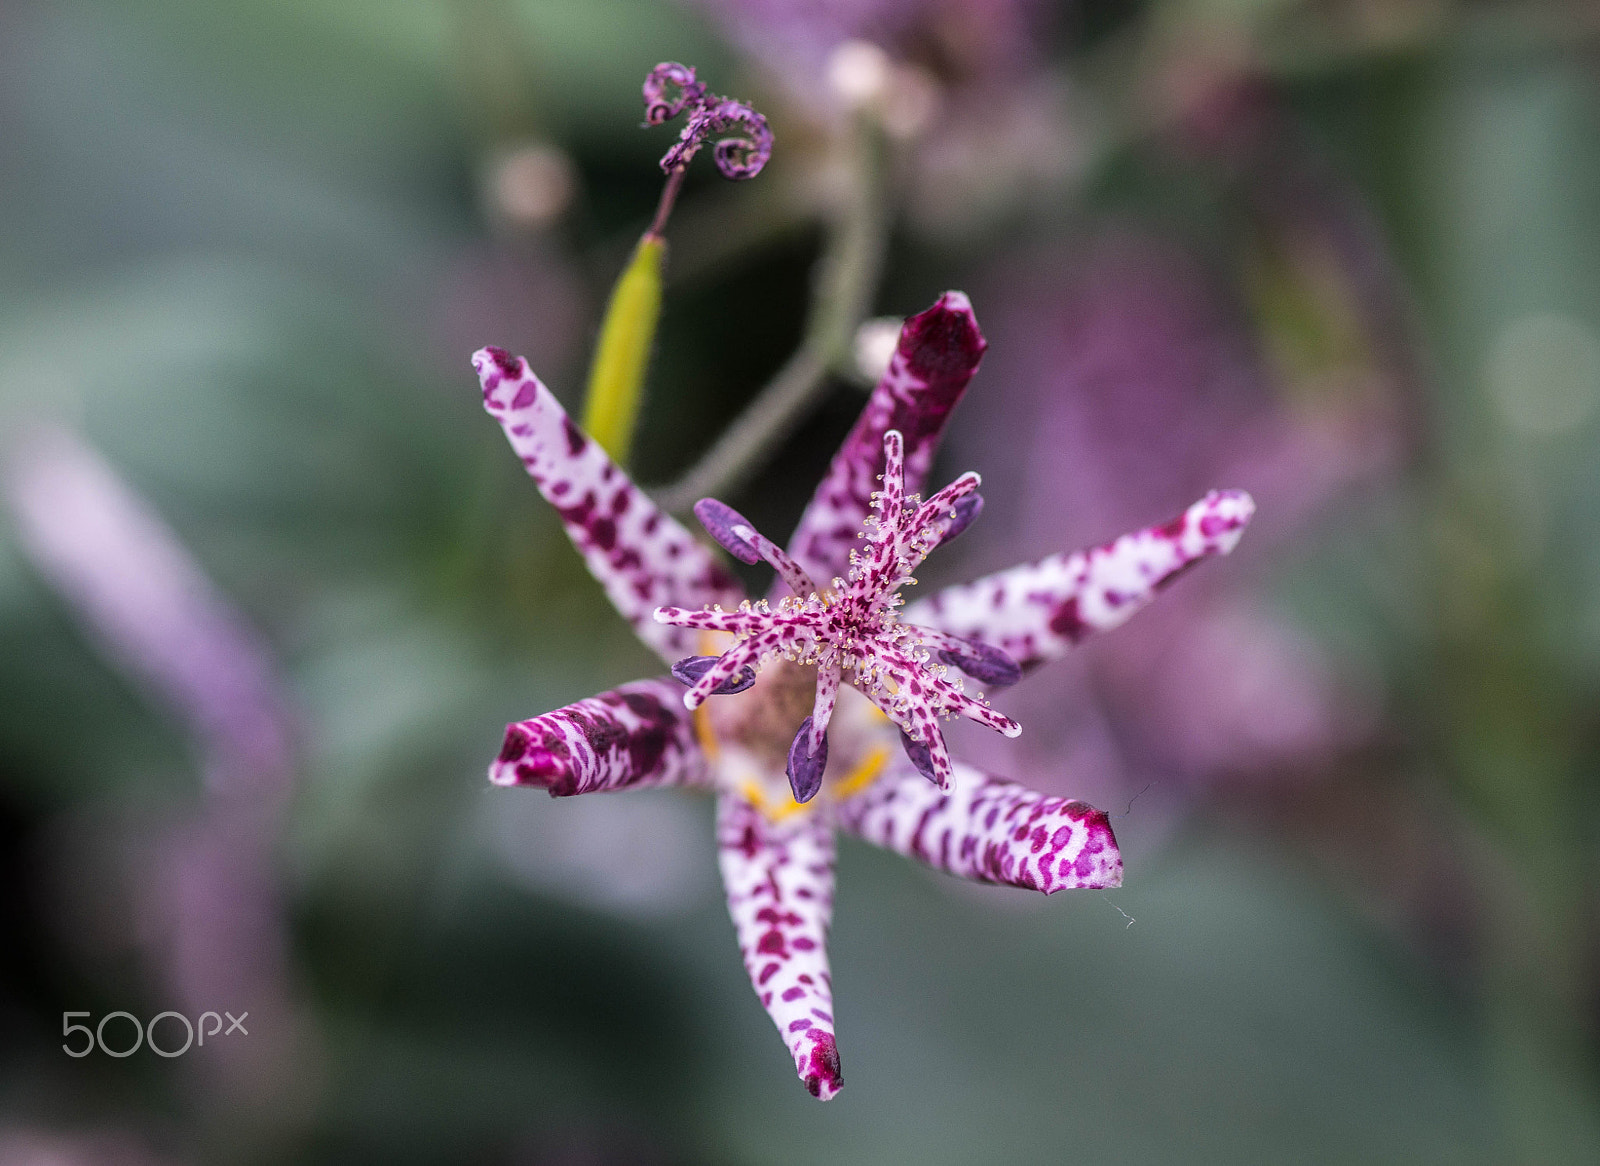 Sony a99 II sample photo. Brilliant star "sinonome"- tricyrtis (toad lily) photography